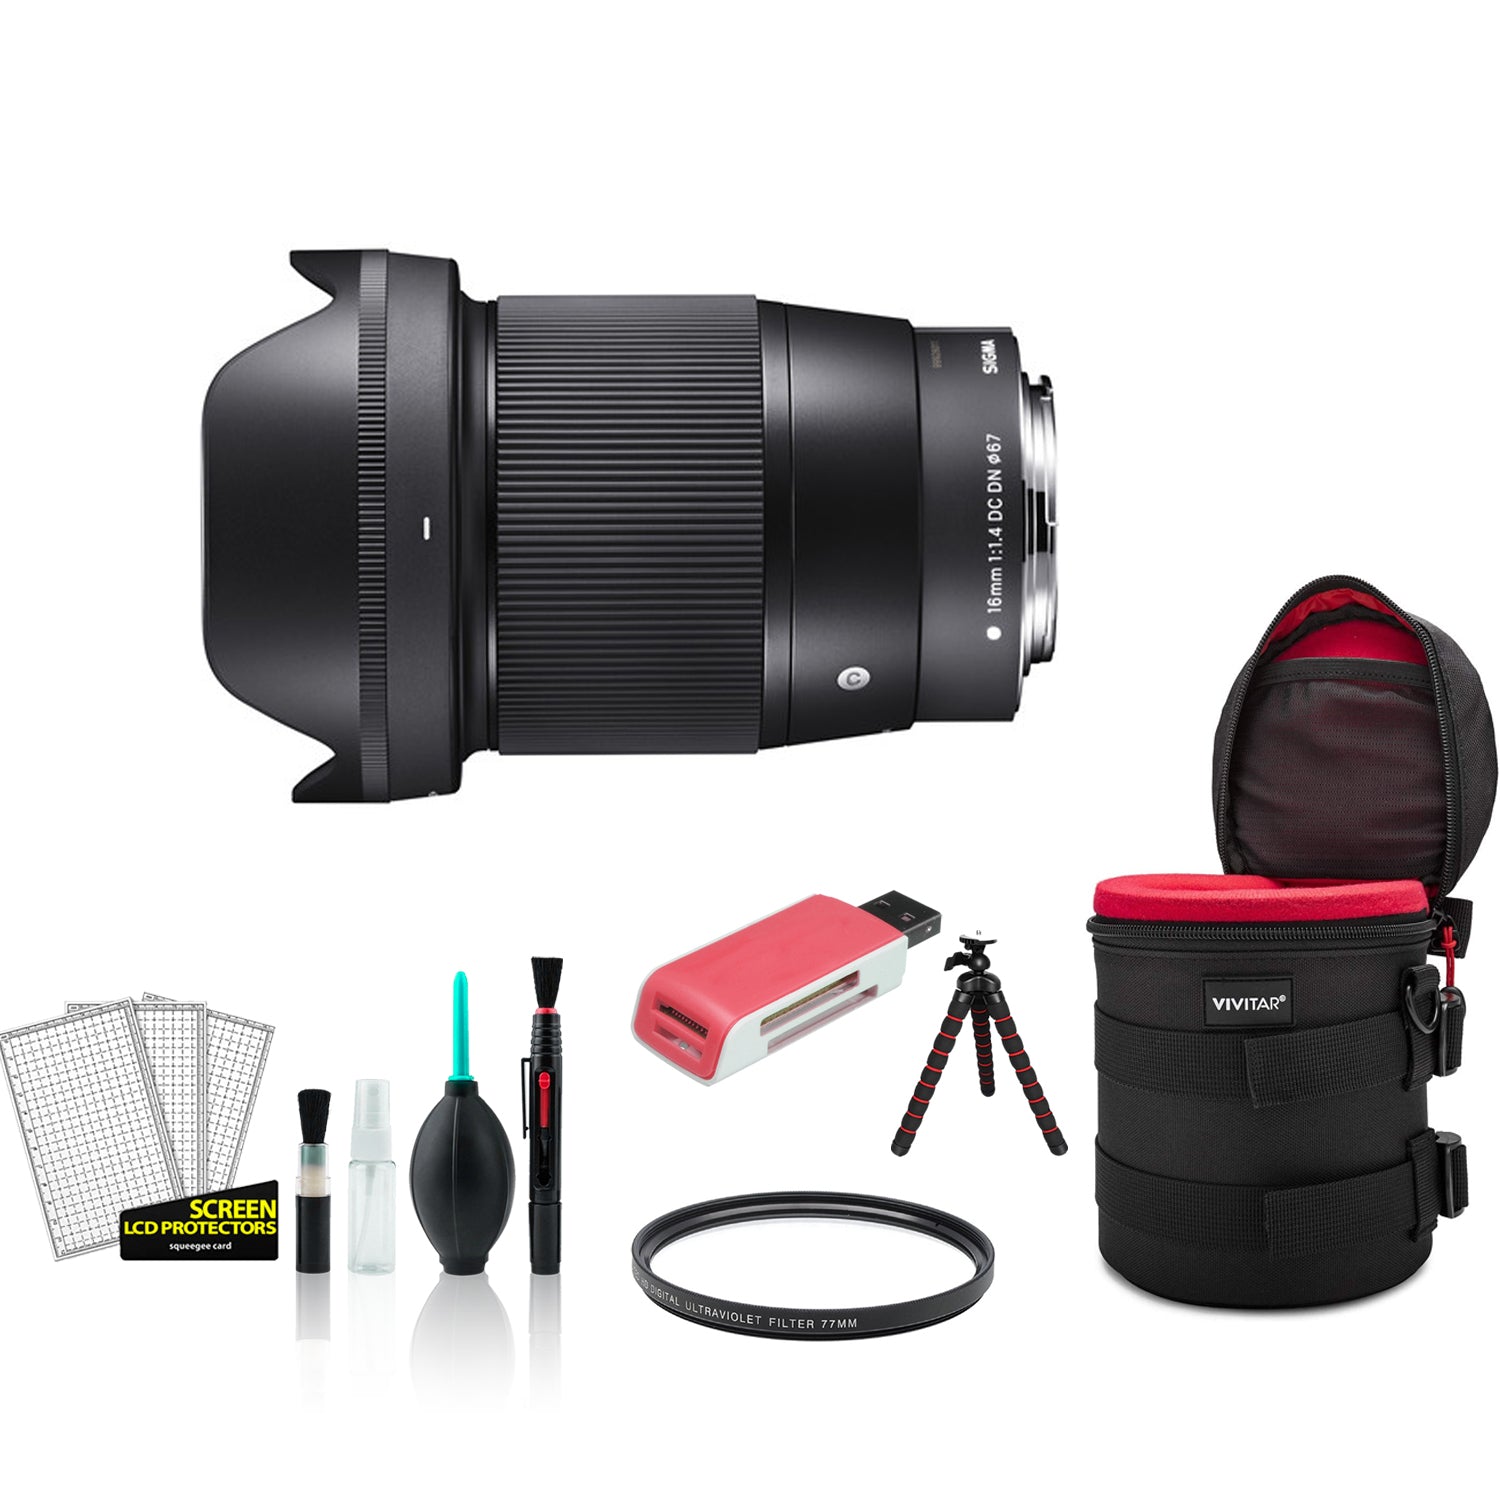 Sigma 16mm Contemporary Lens f/1.4 DC DN for Micro Four Thirds 402963 with UV Filter Bundle